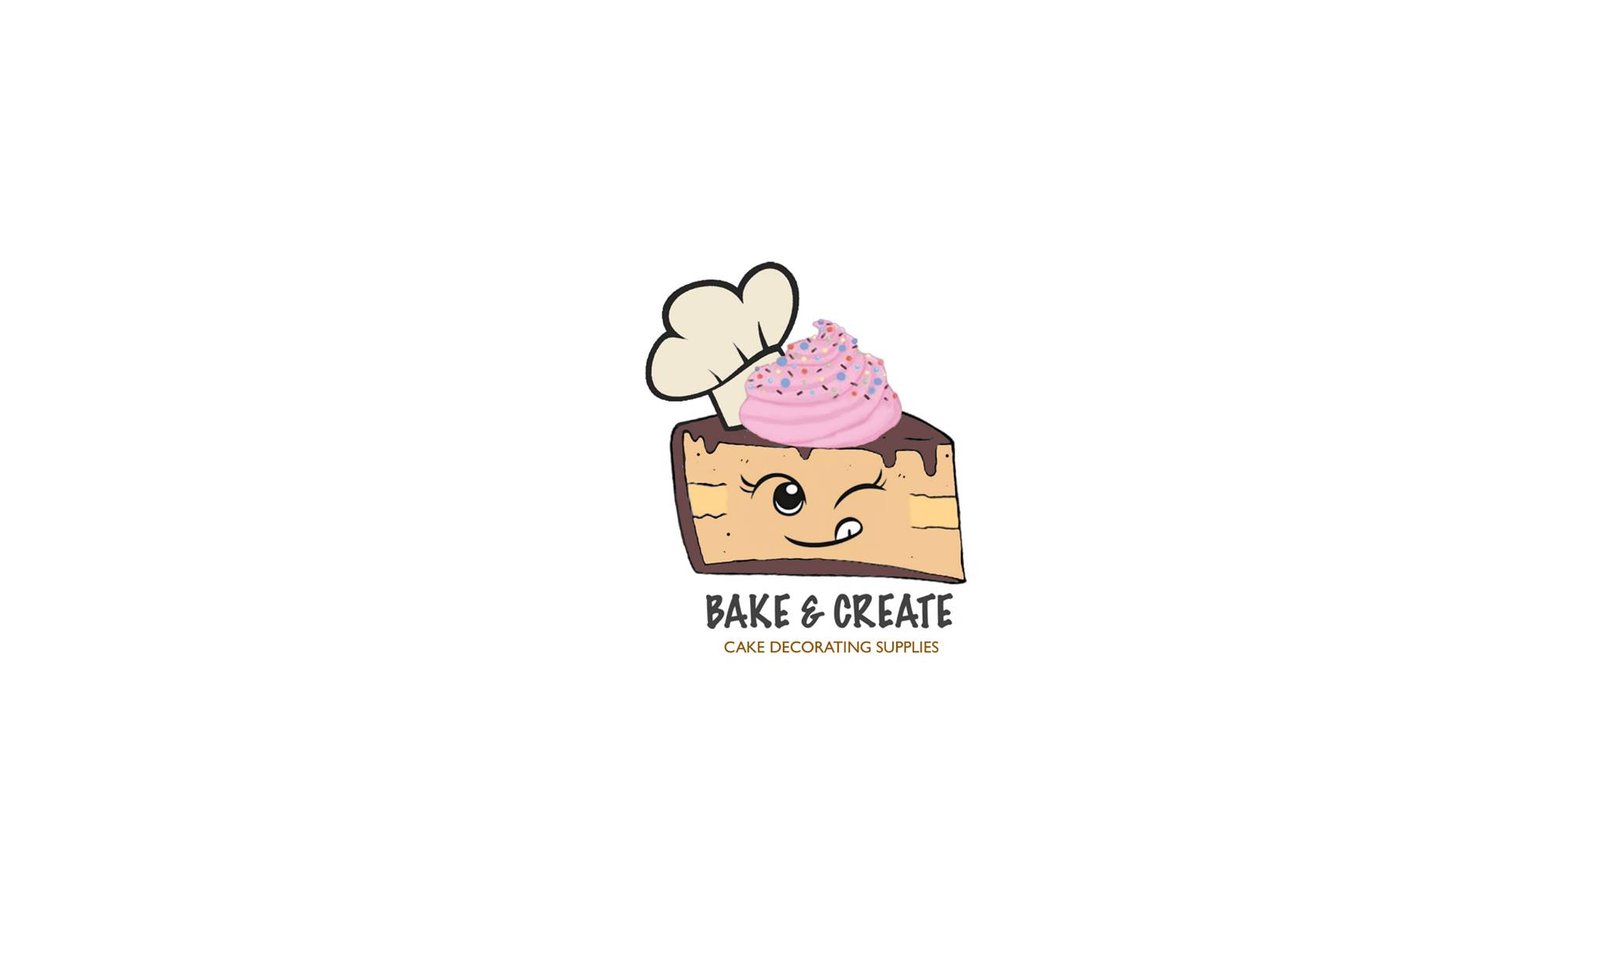 Bake and Create – Cake Decorating Supplies